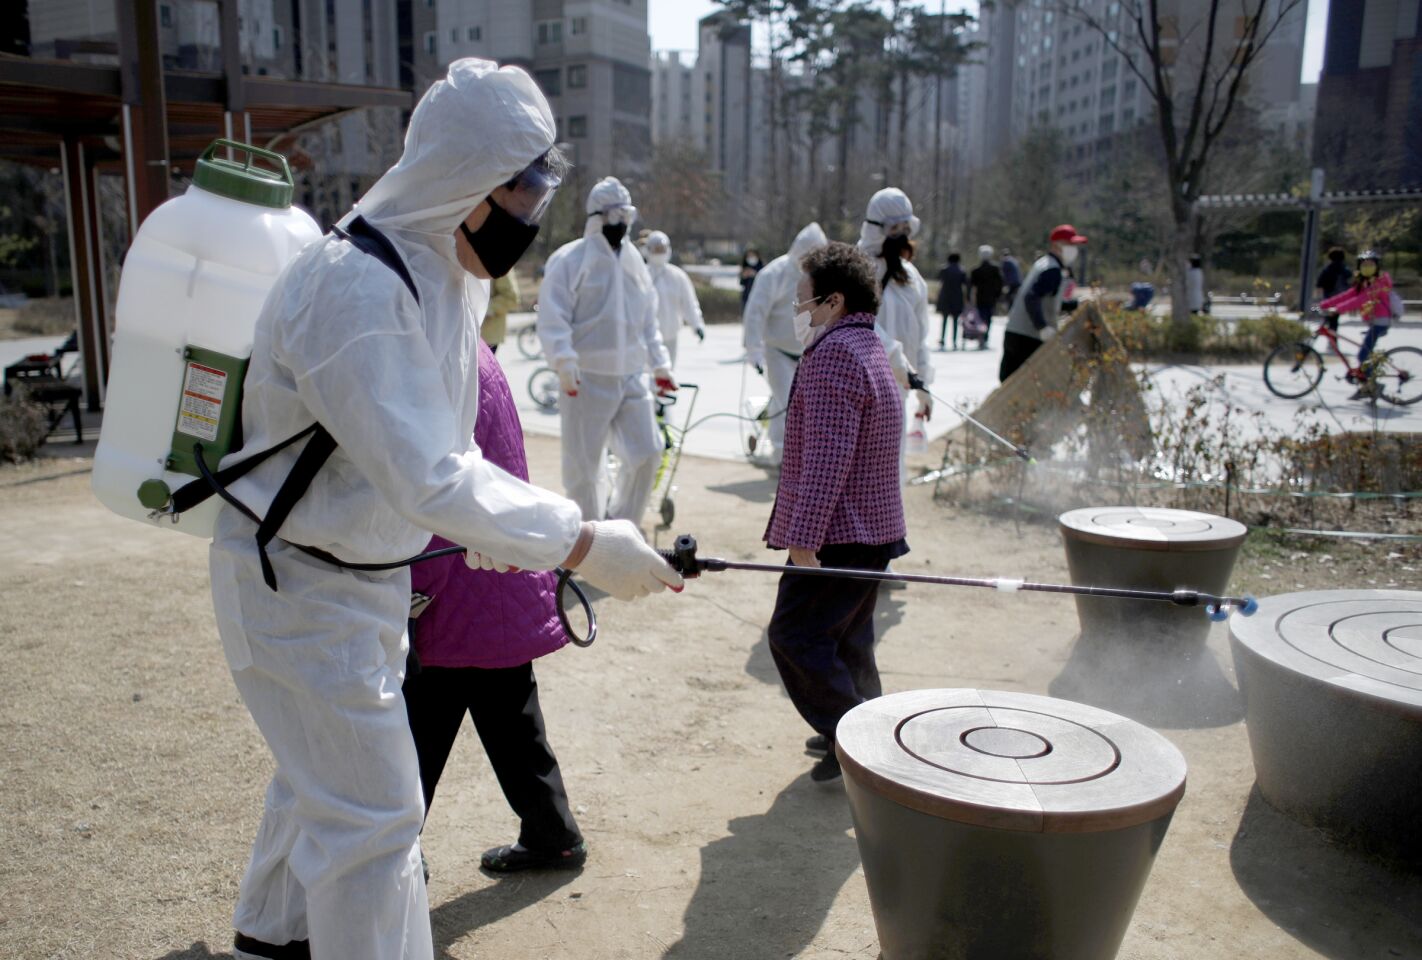 South Korea: Members of a local residents group wear protective gear as they disinfect a local park as a precaution against the new coronavirus in Seoul.